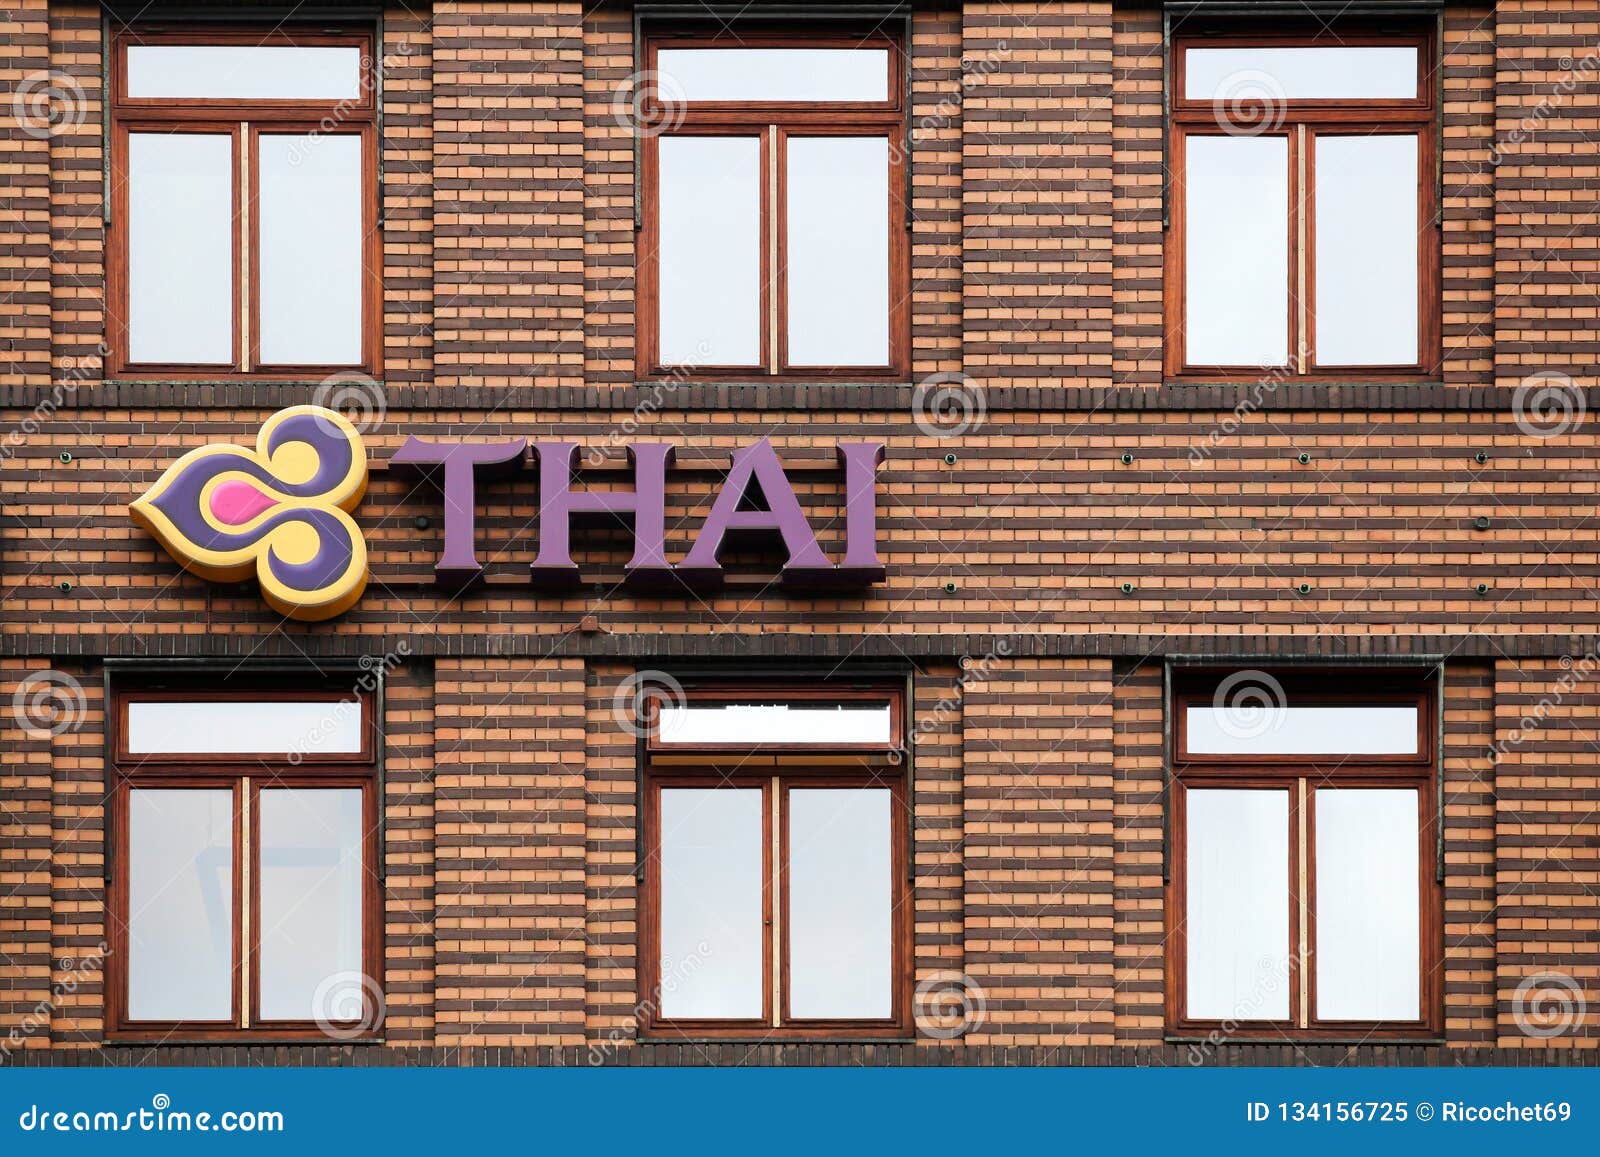 Thai Airways Logo On A Building Editorial Image - Image of